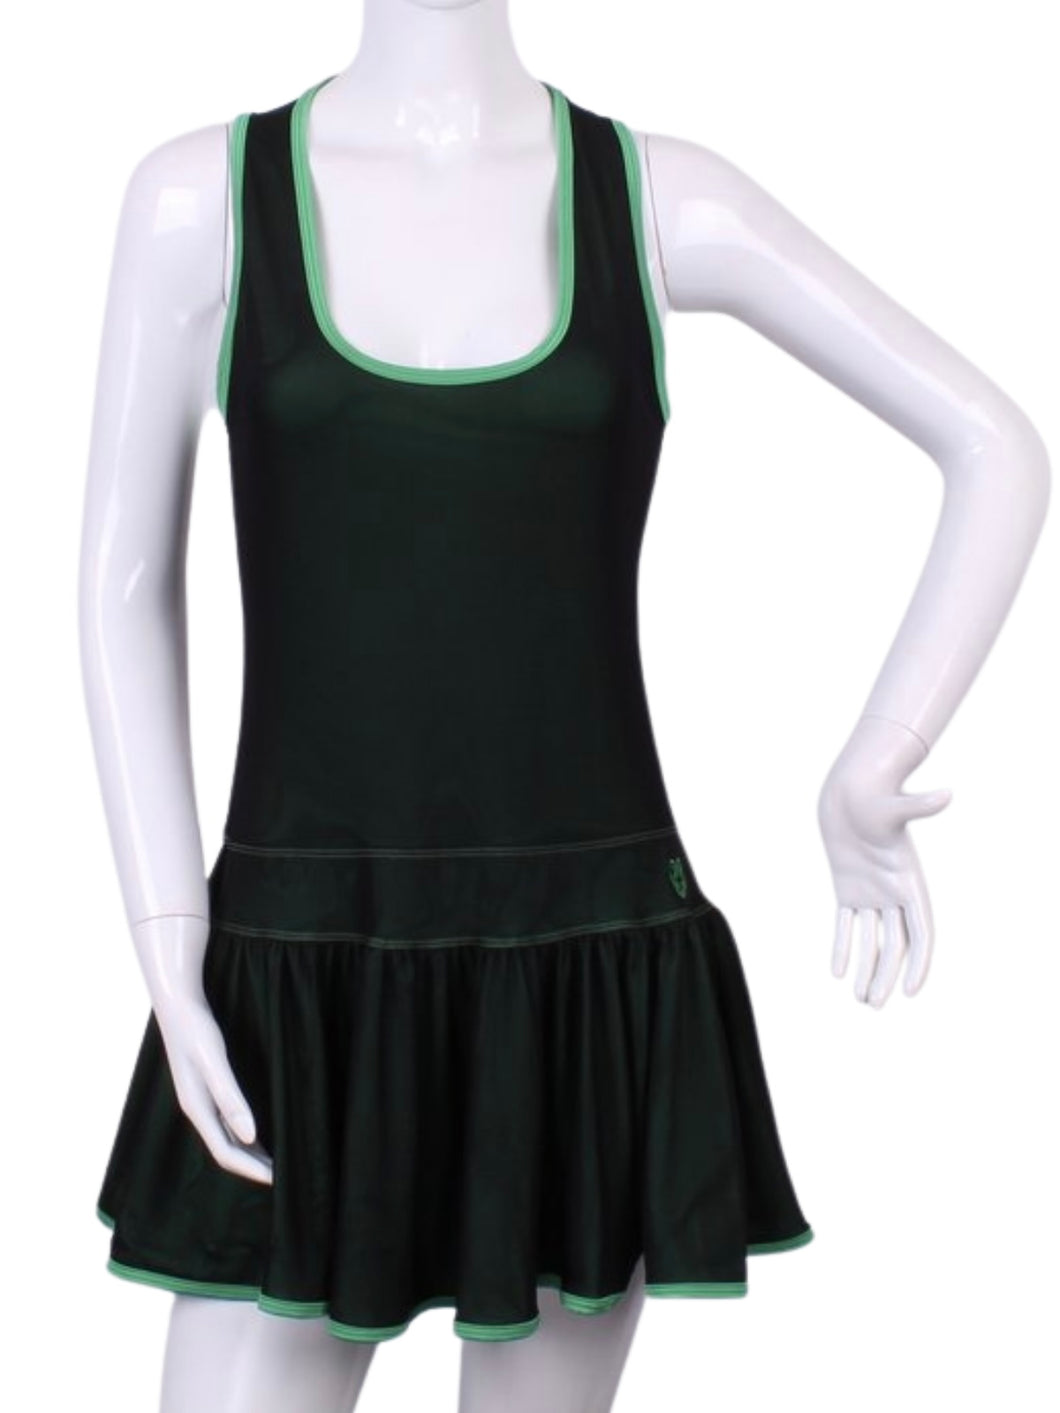 Meet my playful, fun, and very flirty tennis dress The Sandra Dee. I designed it just for you. A tennis player designing for tennis players!